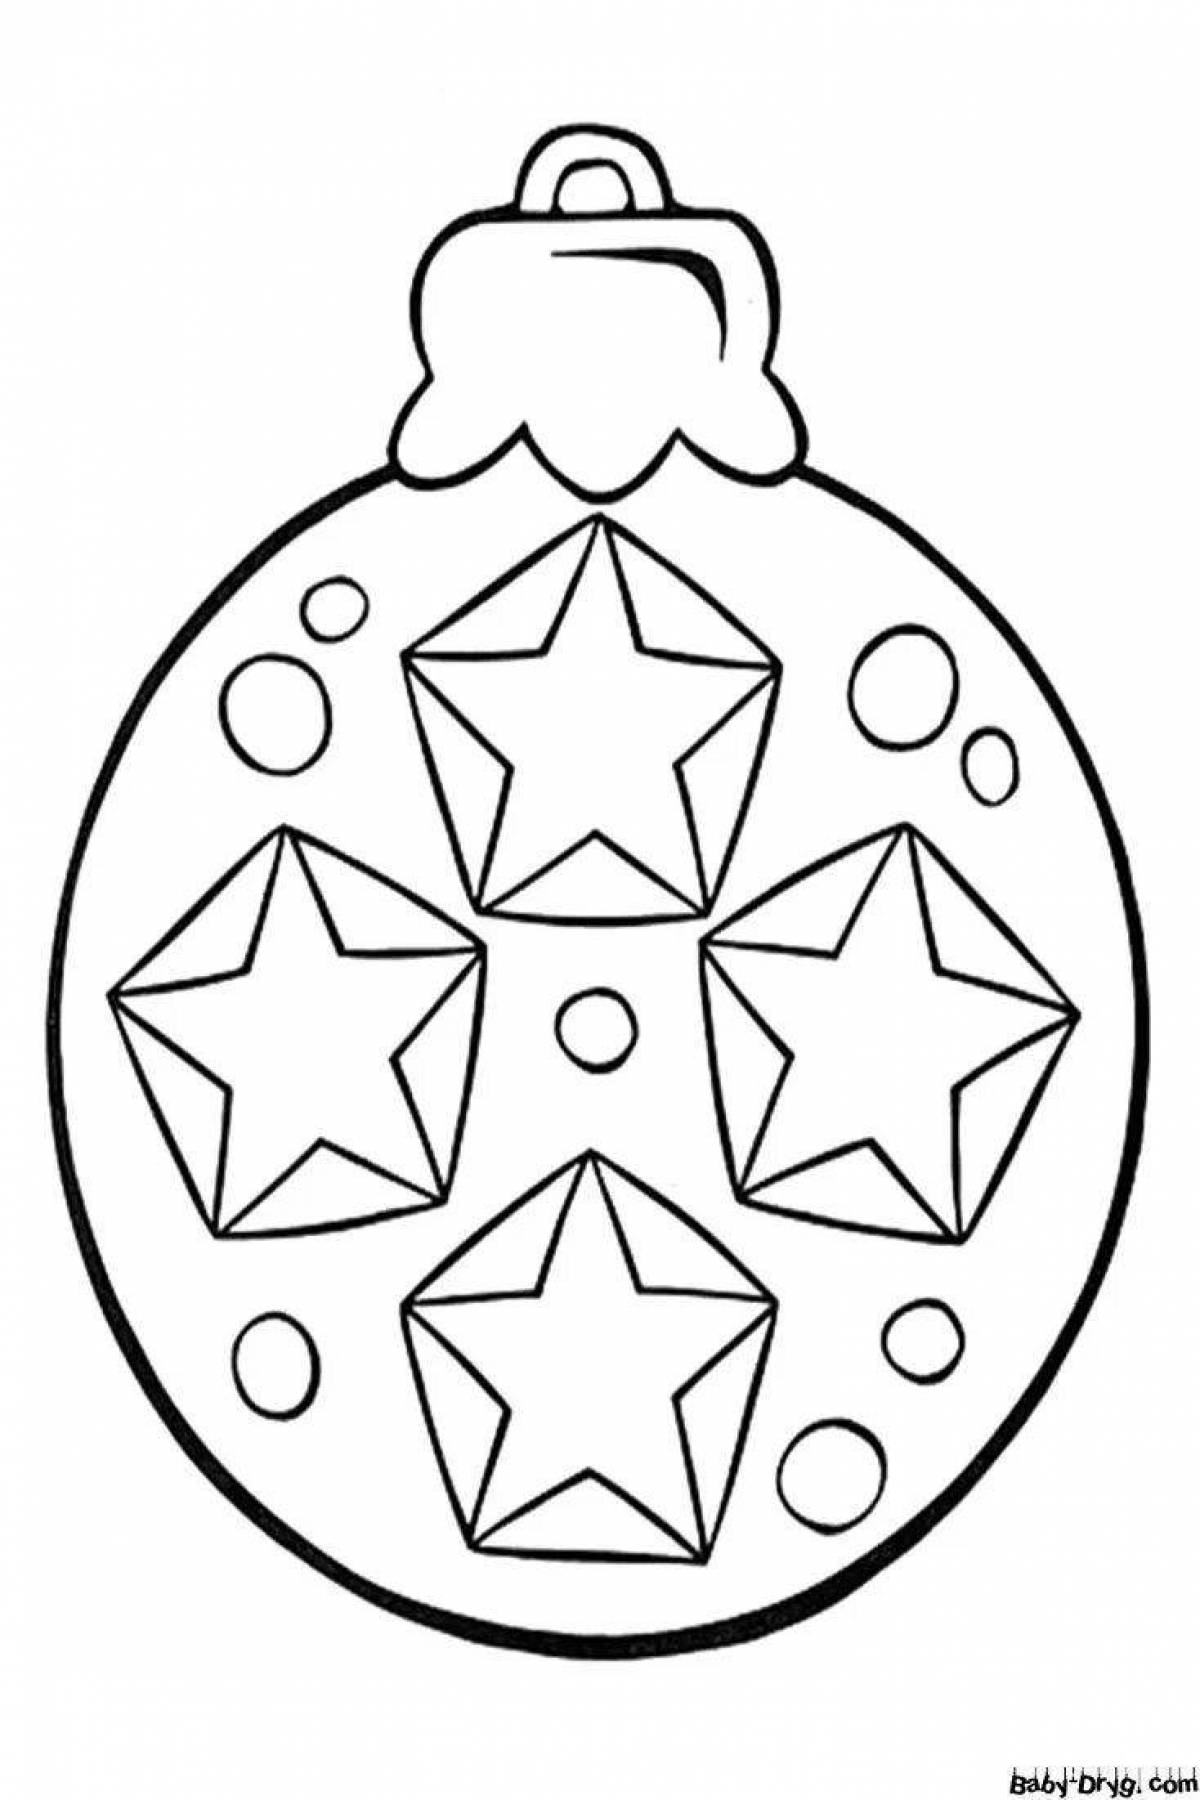 Glittering Christmas ball coloring book for kids